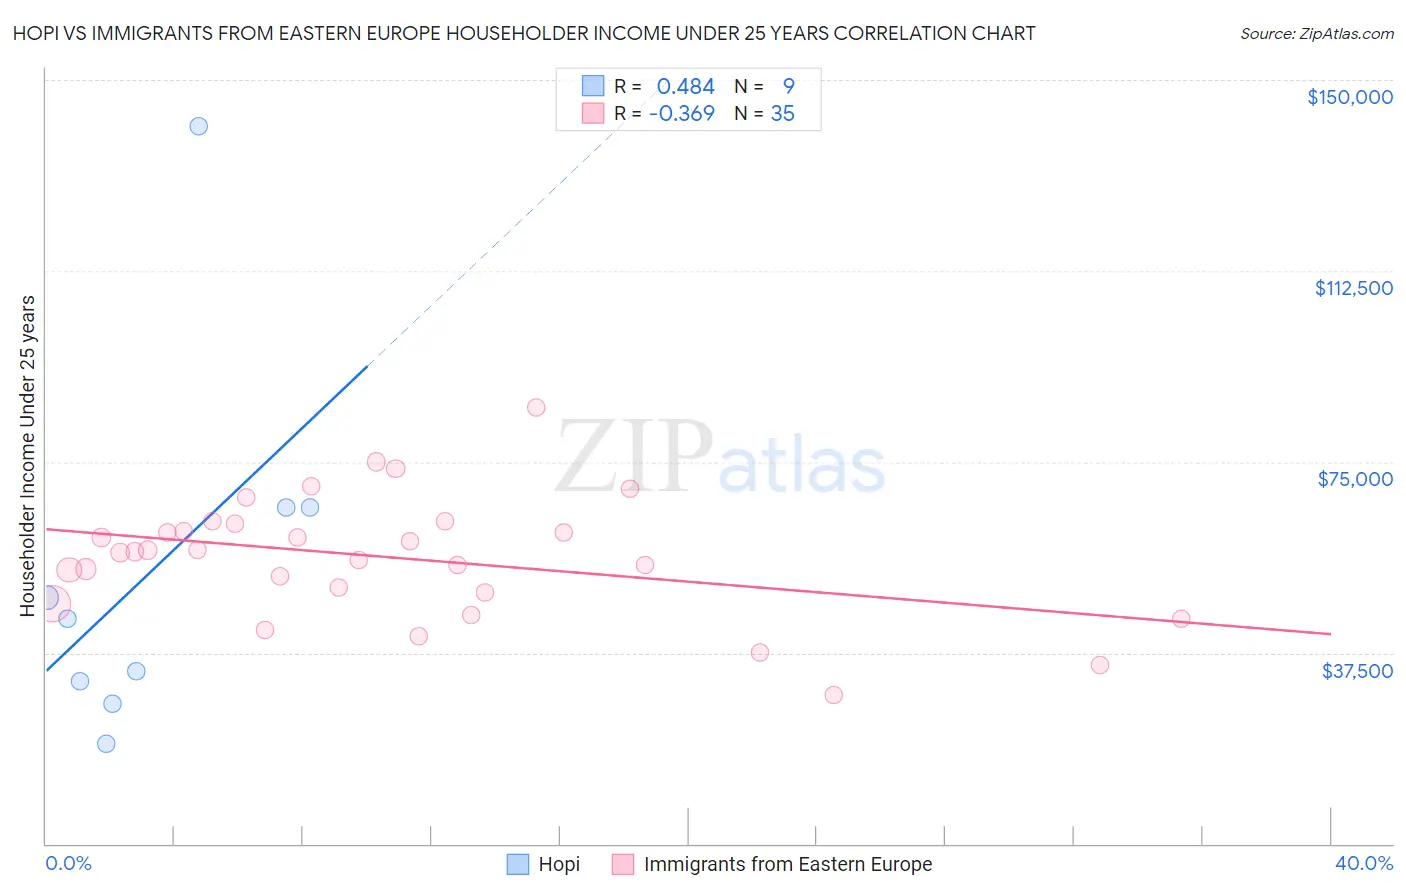 Hopi vs Immigrants from Eastern Europe Householder Income Under 25 years